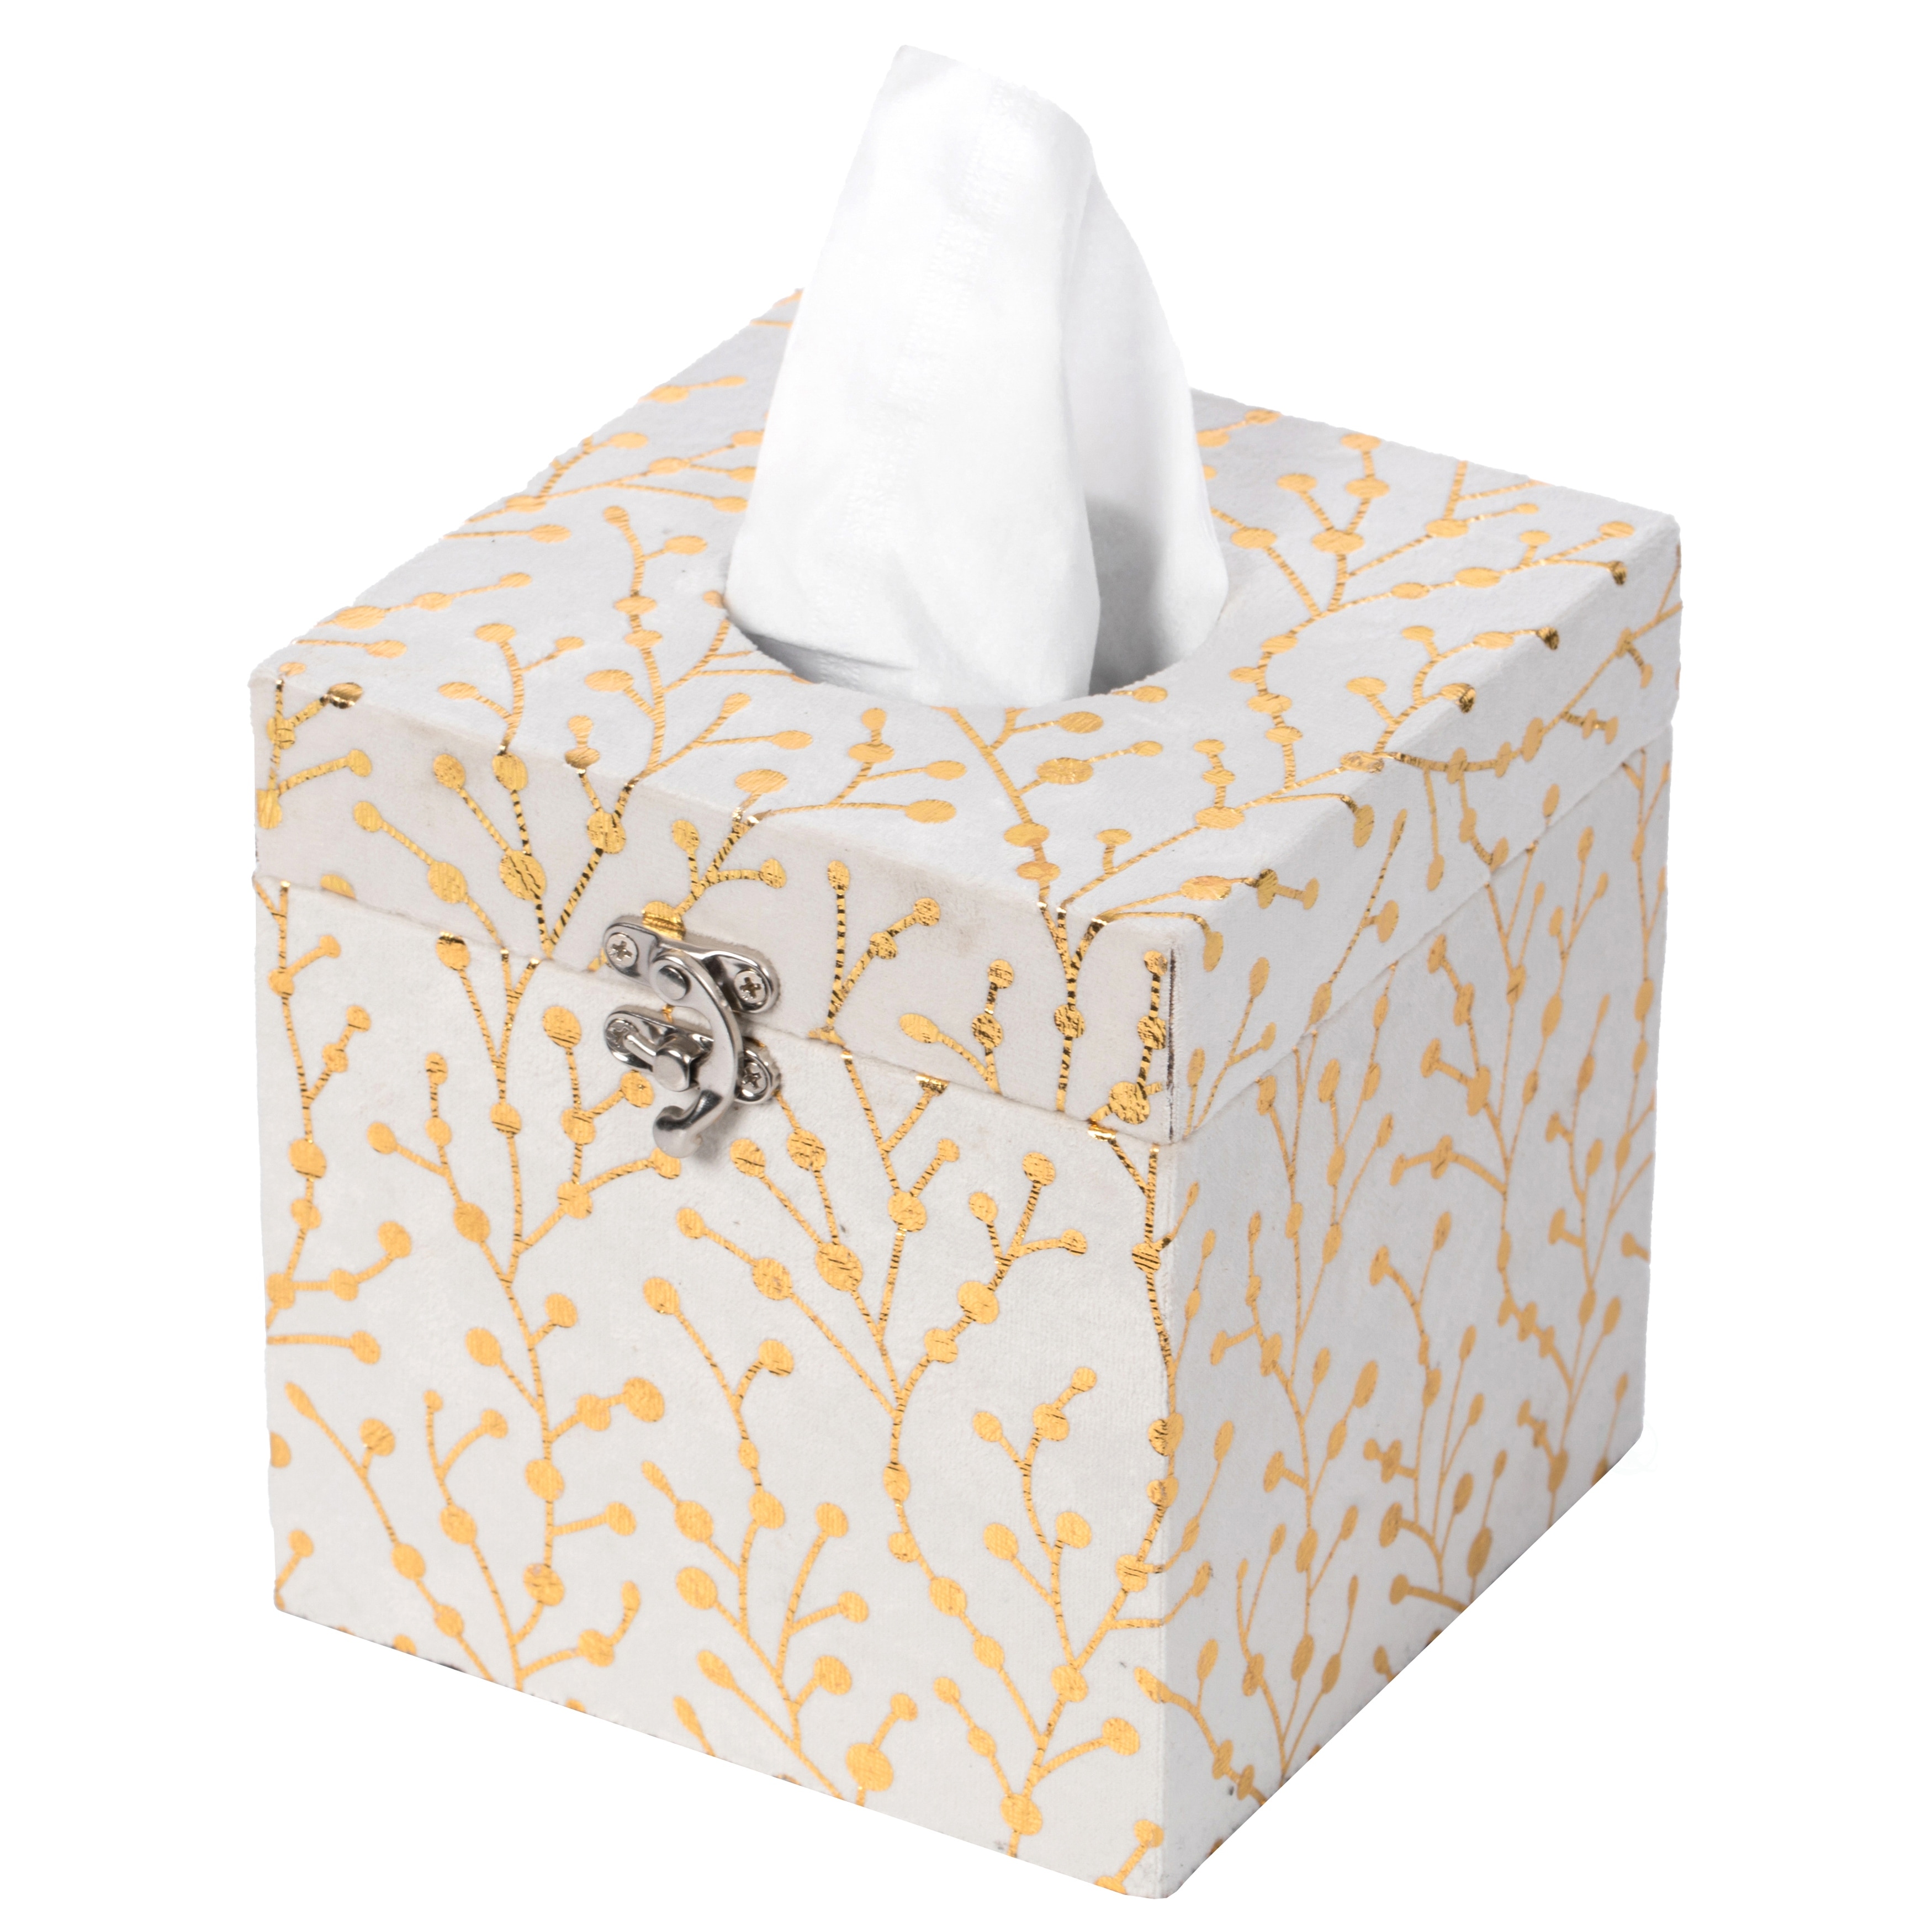 Velvet Tissue Cover Box Rectangle Paper Container Solid Color Tassels Pendant 